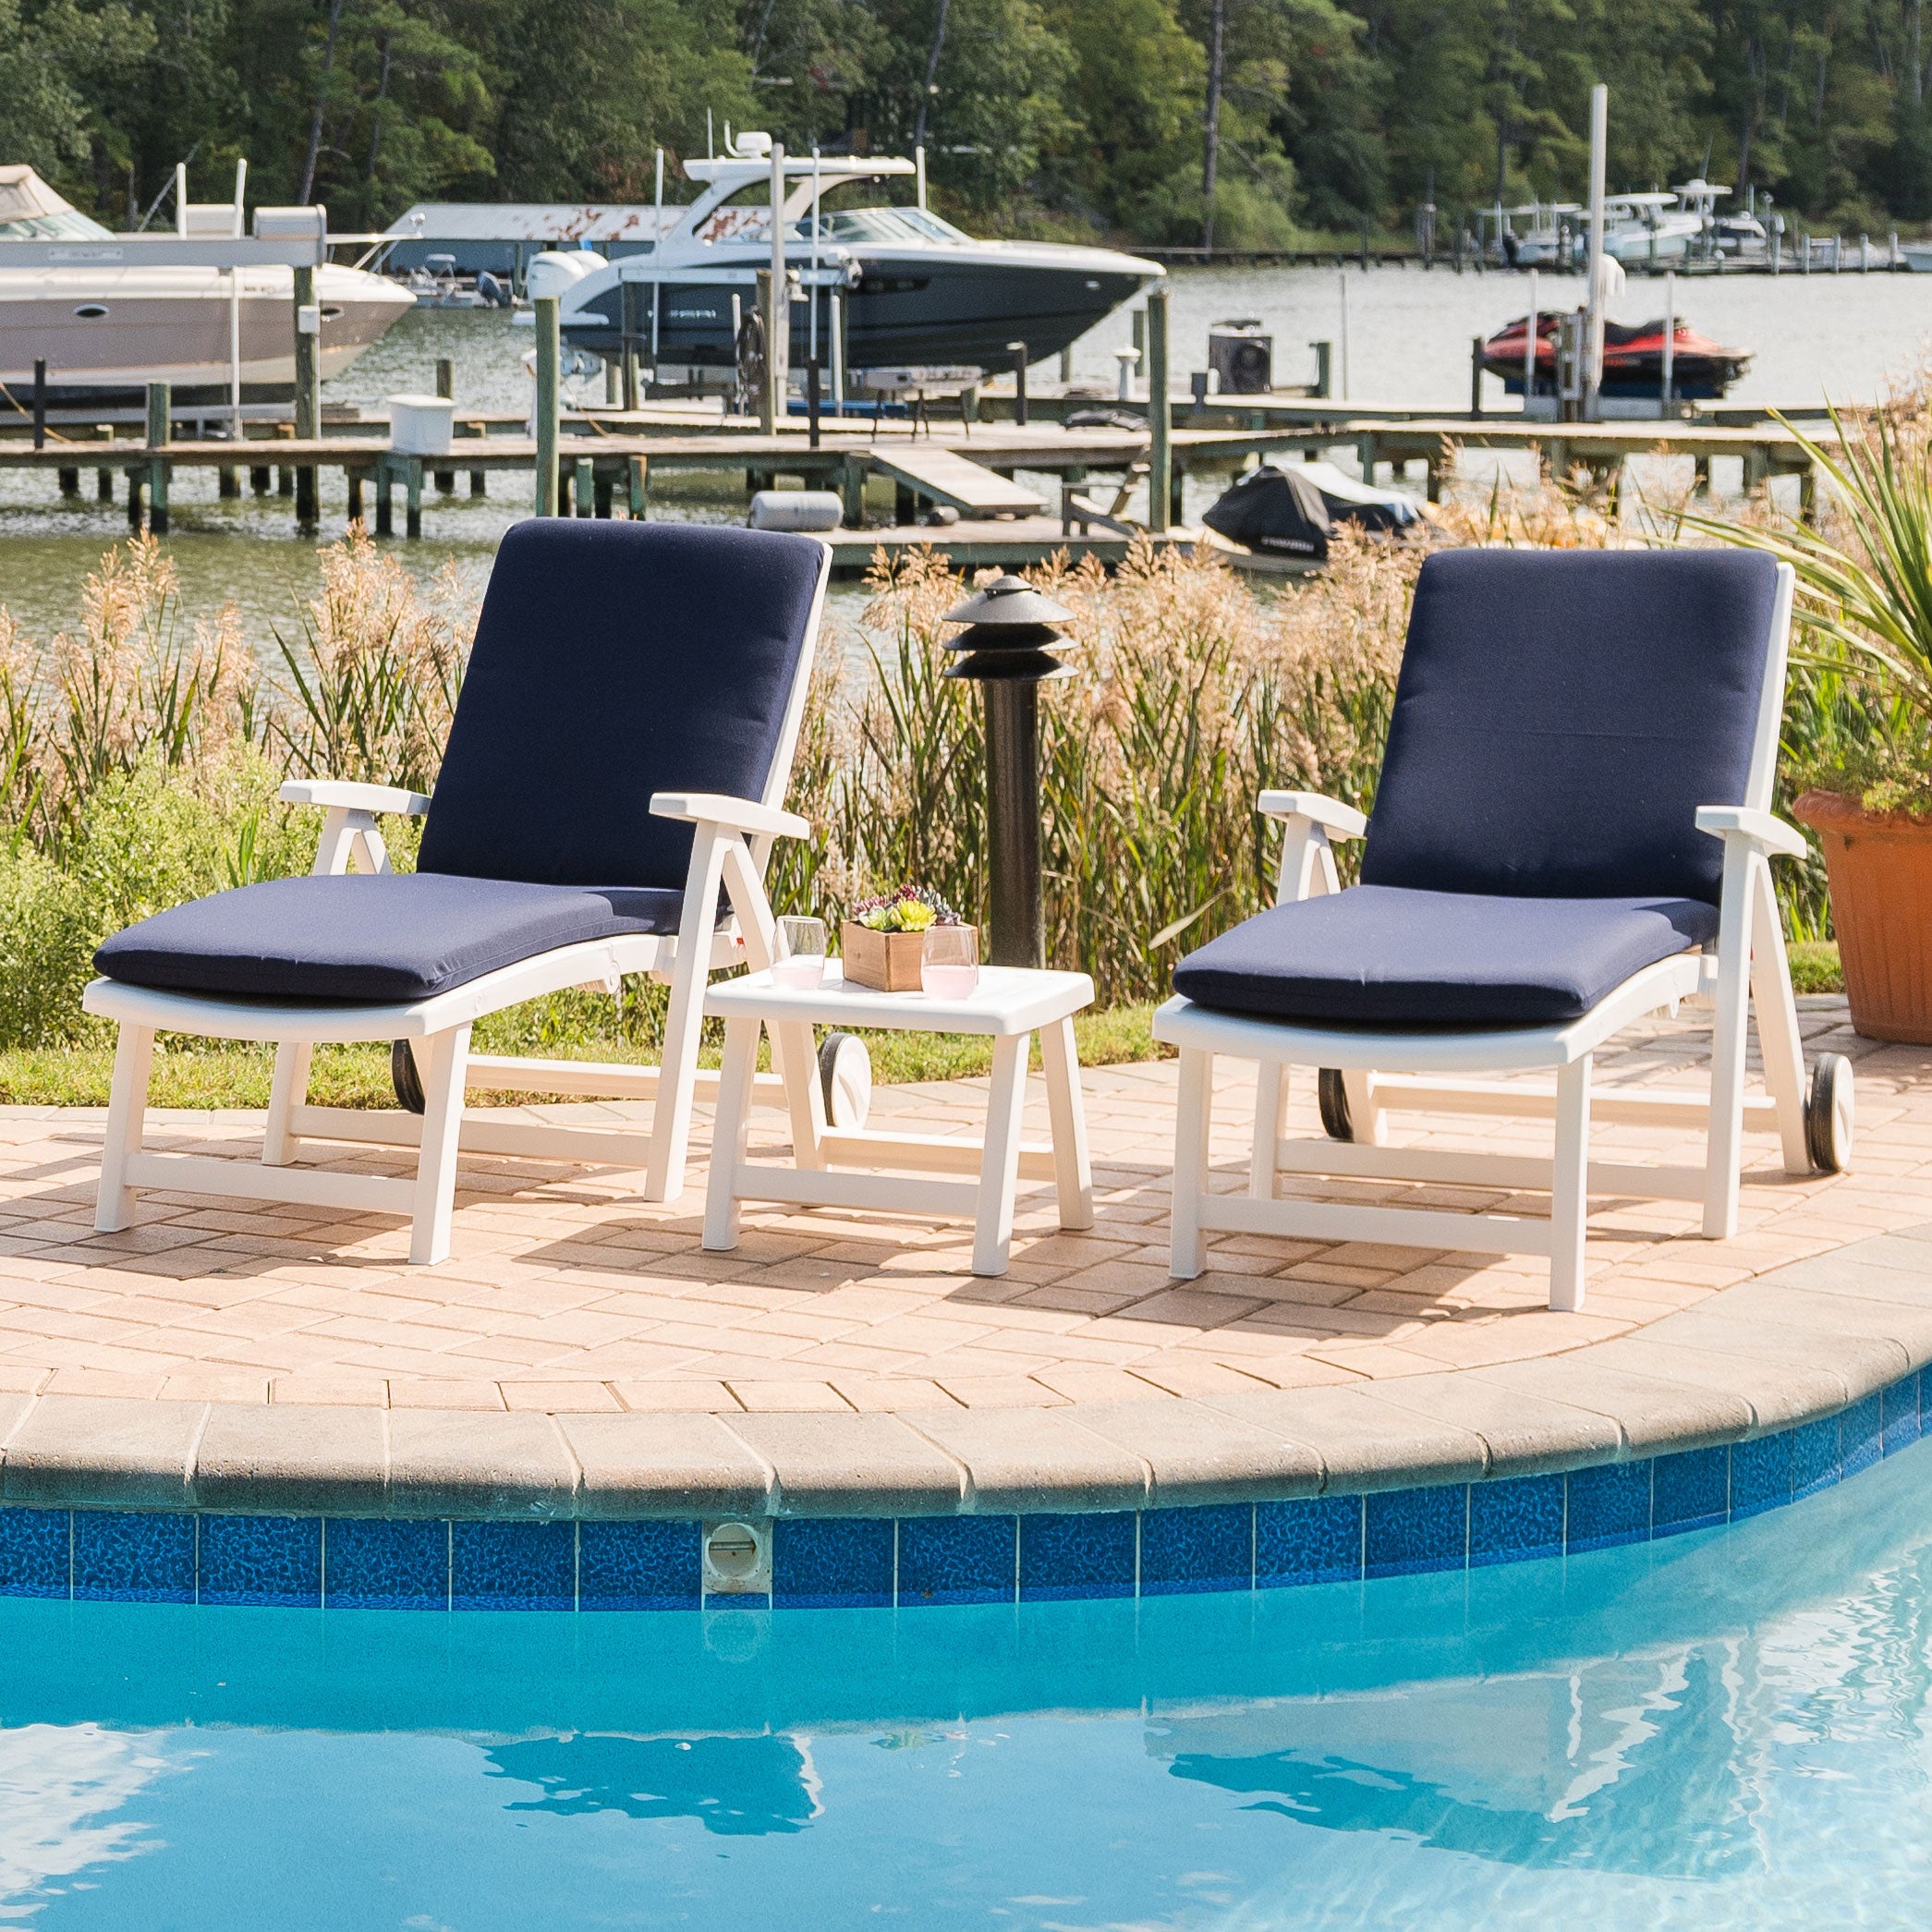 Roma Multi Position Lounger Set With Table & Cushions